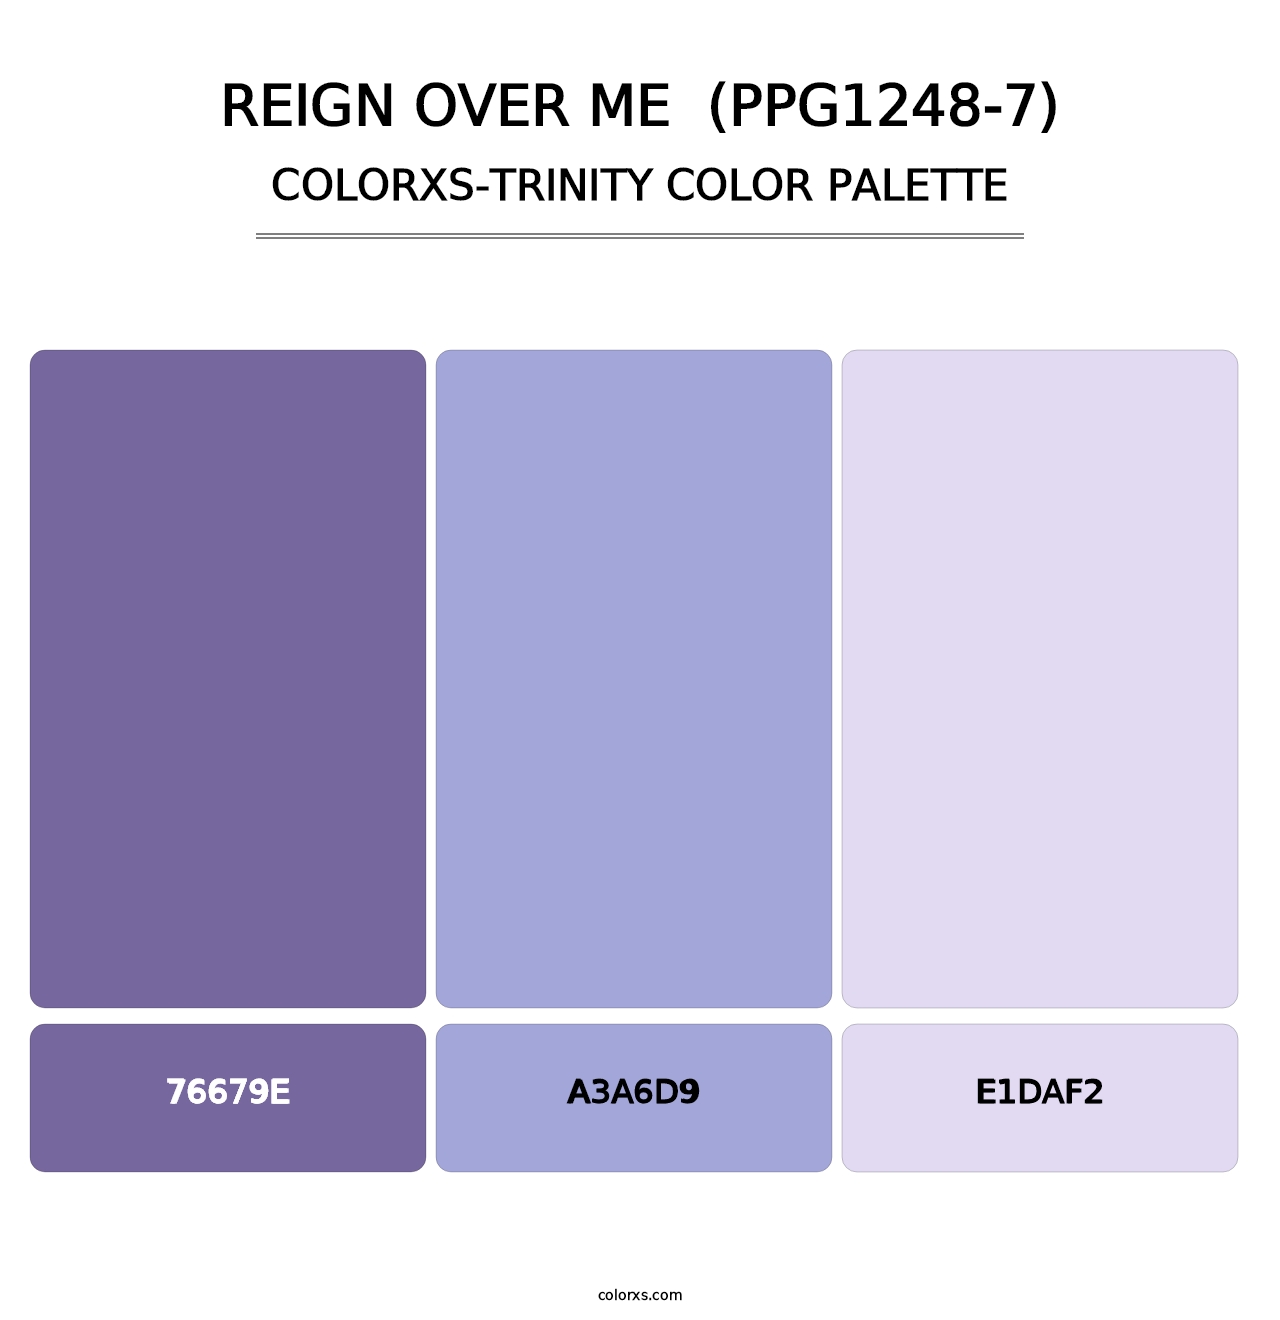 Reign Over Me  (PPG1248-7) - Colorxs Trinity Palette